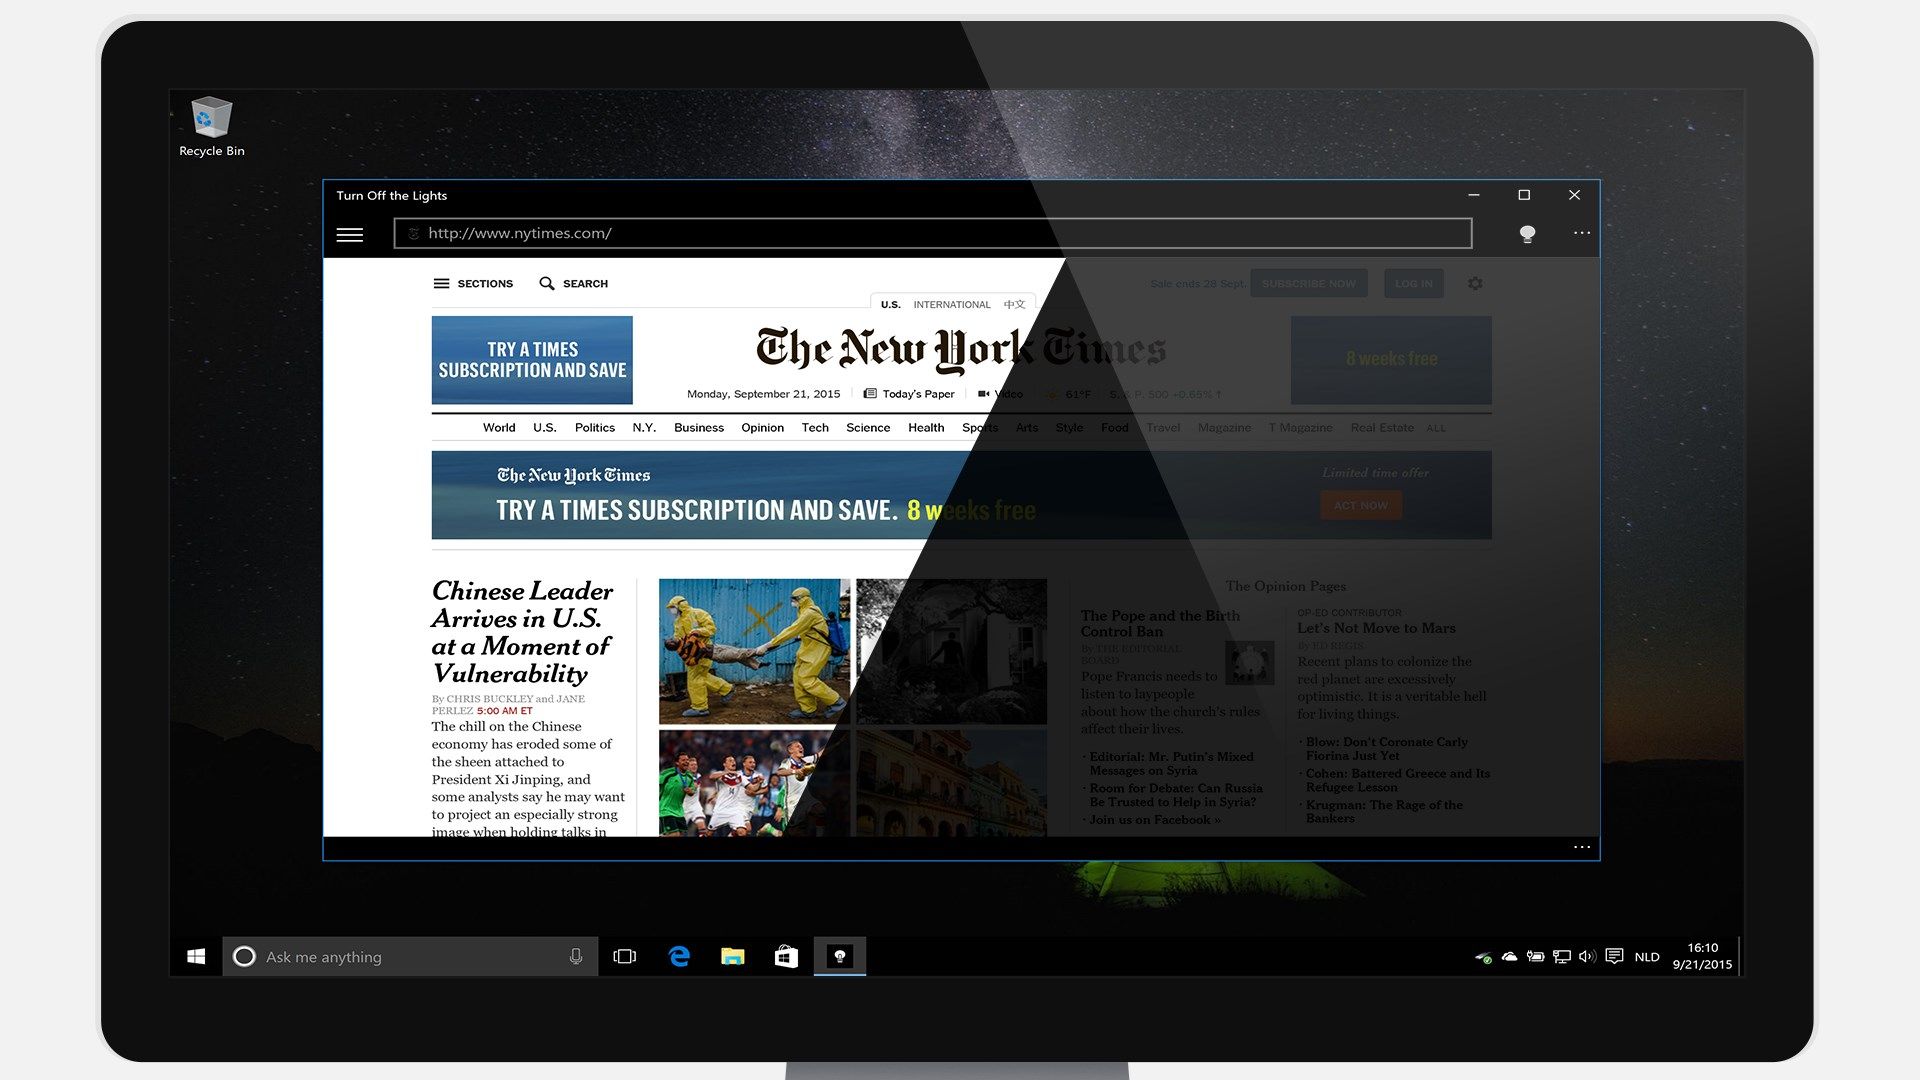 Turn Off the Lights - Compare the New York Times website with the dark layer enabled.